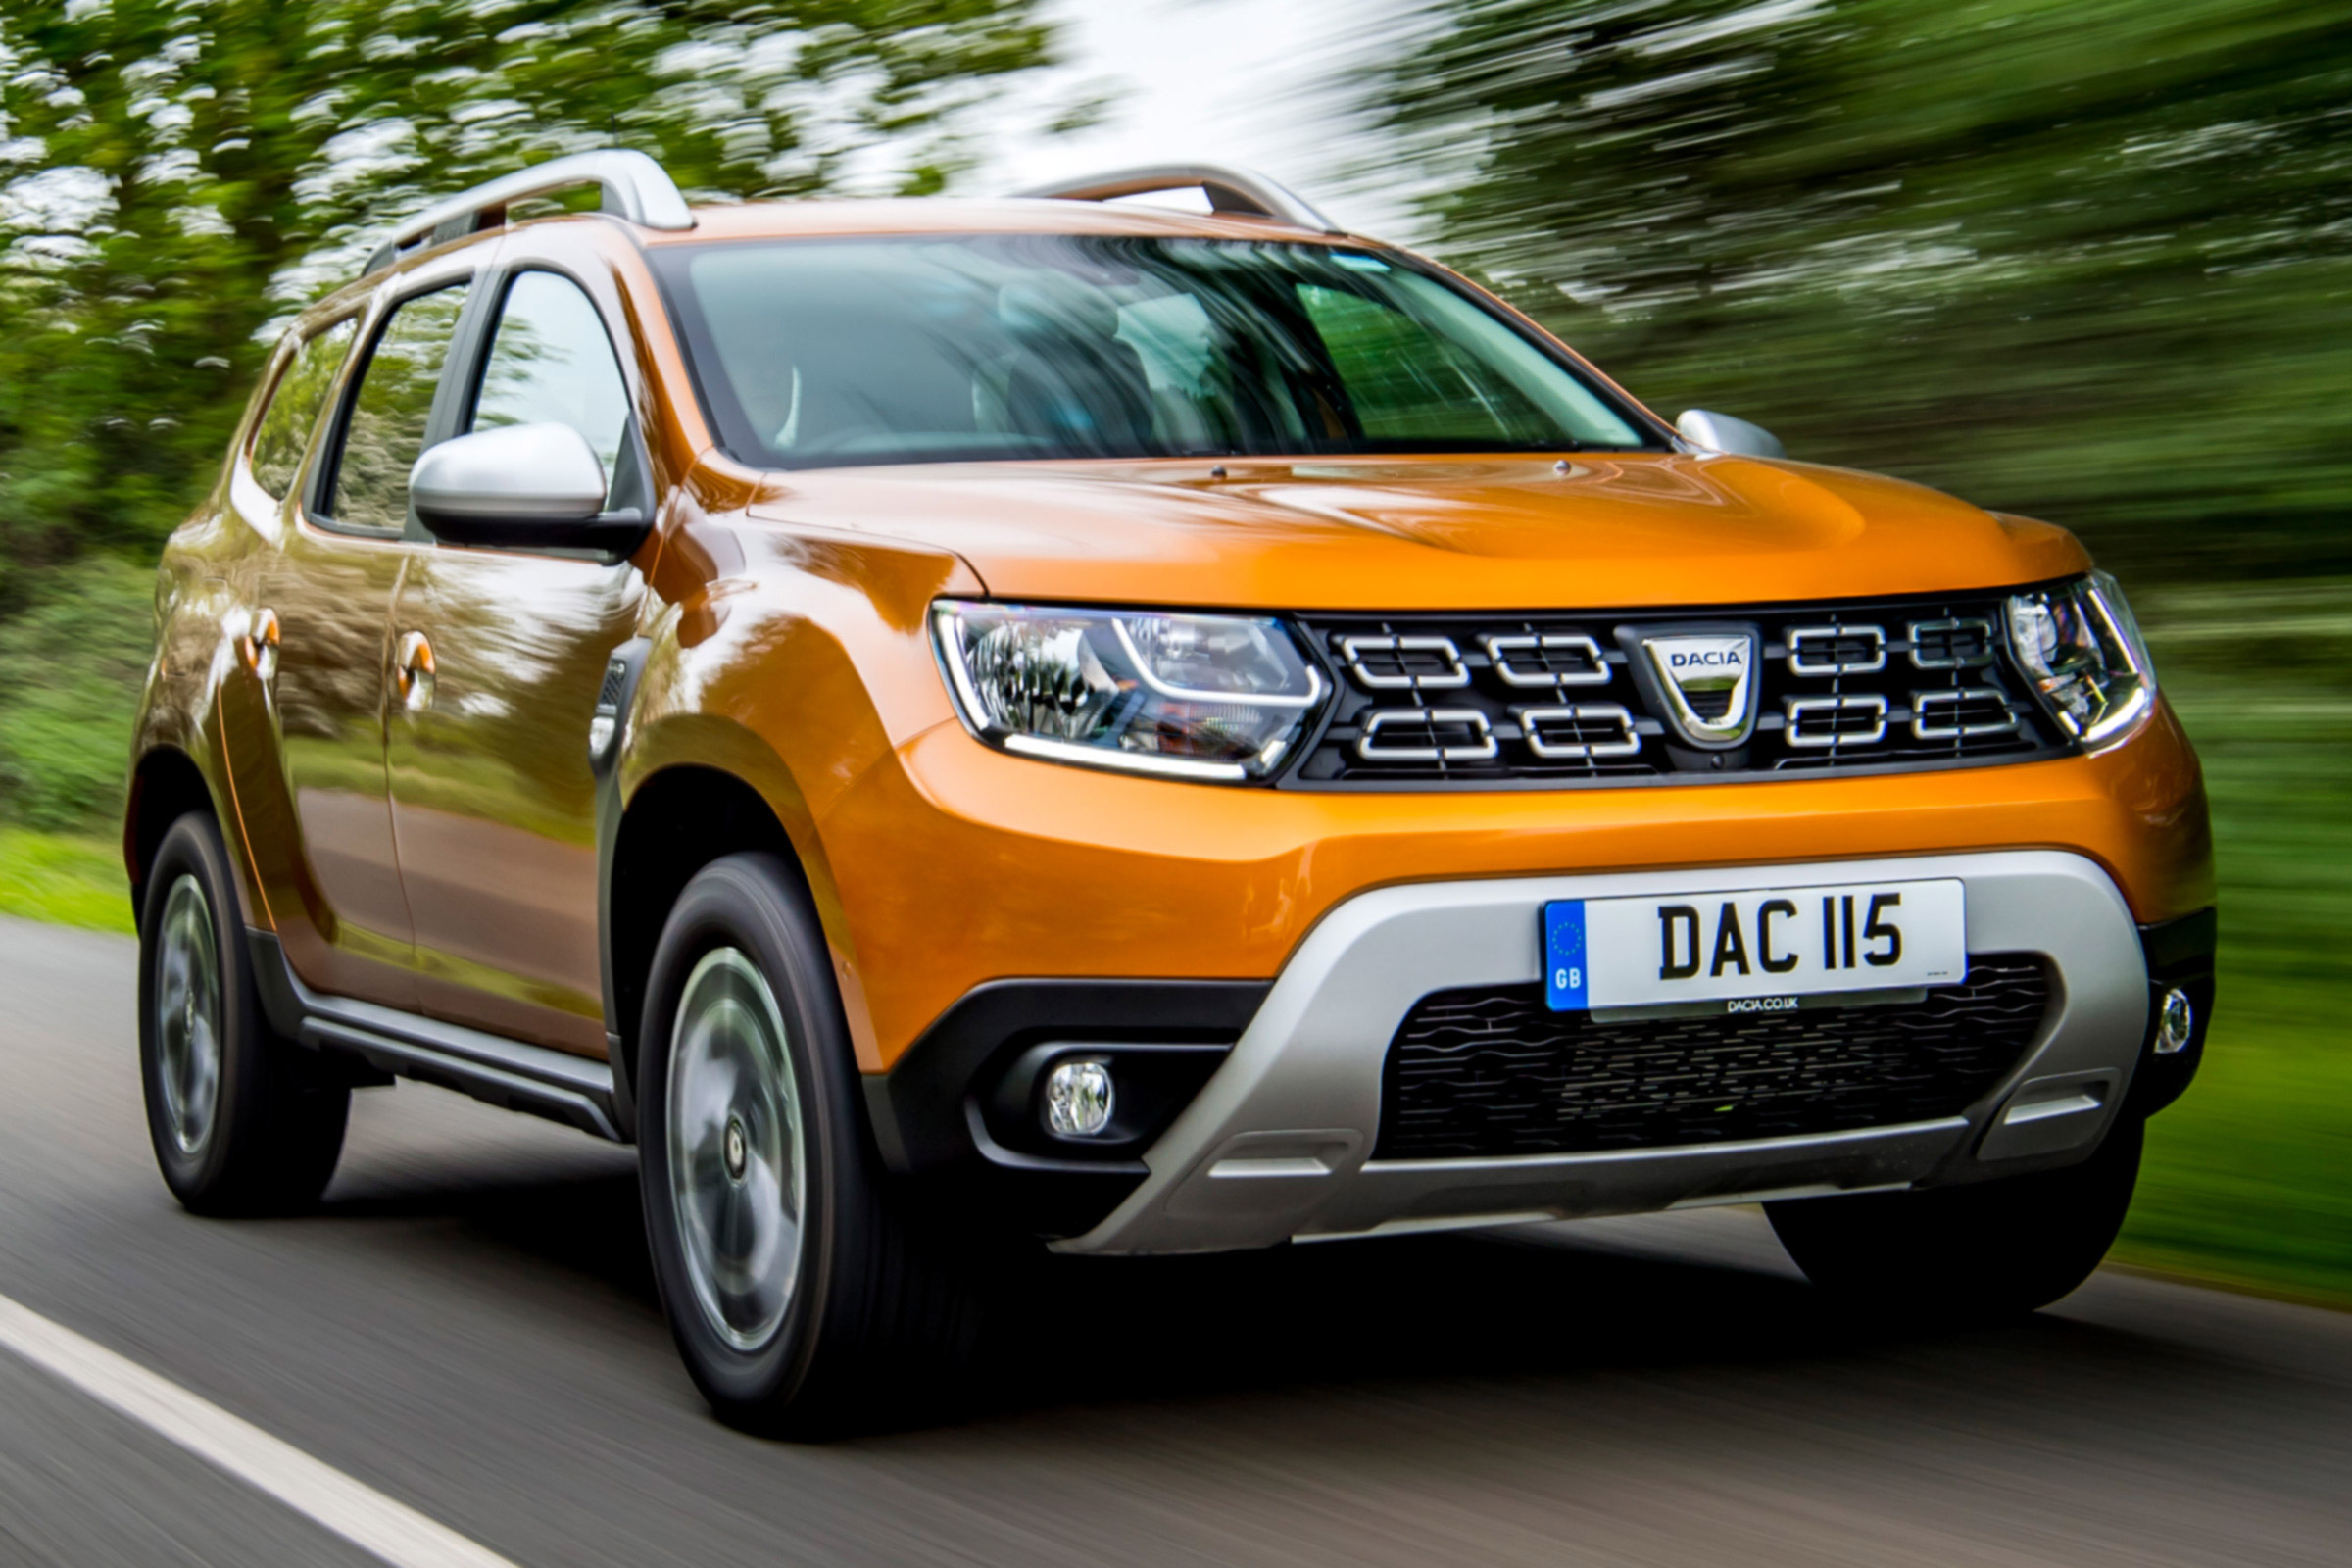 New 2019 Dacia Duster SUV: full details, pricing and 